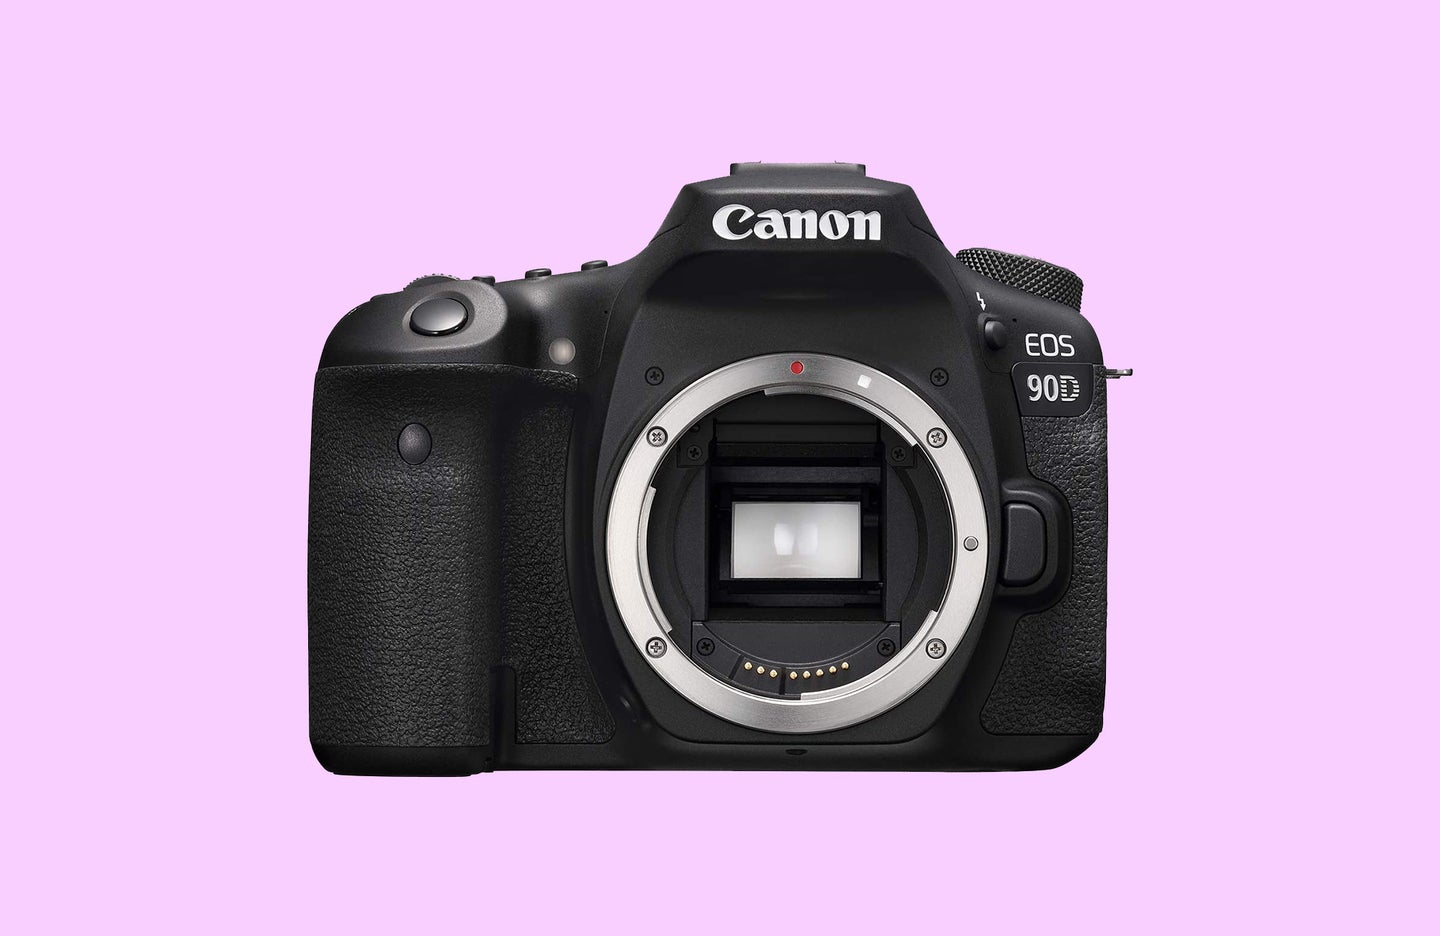 The Canon 90D is one of the best DSLR cameras.